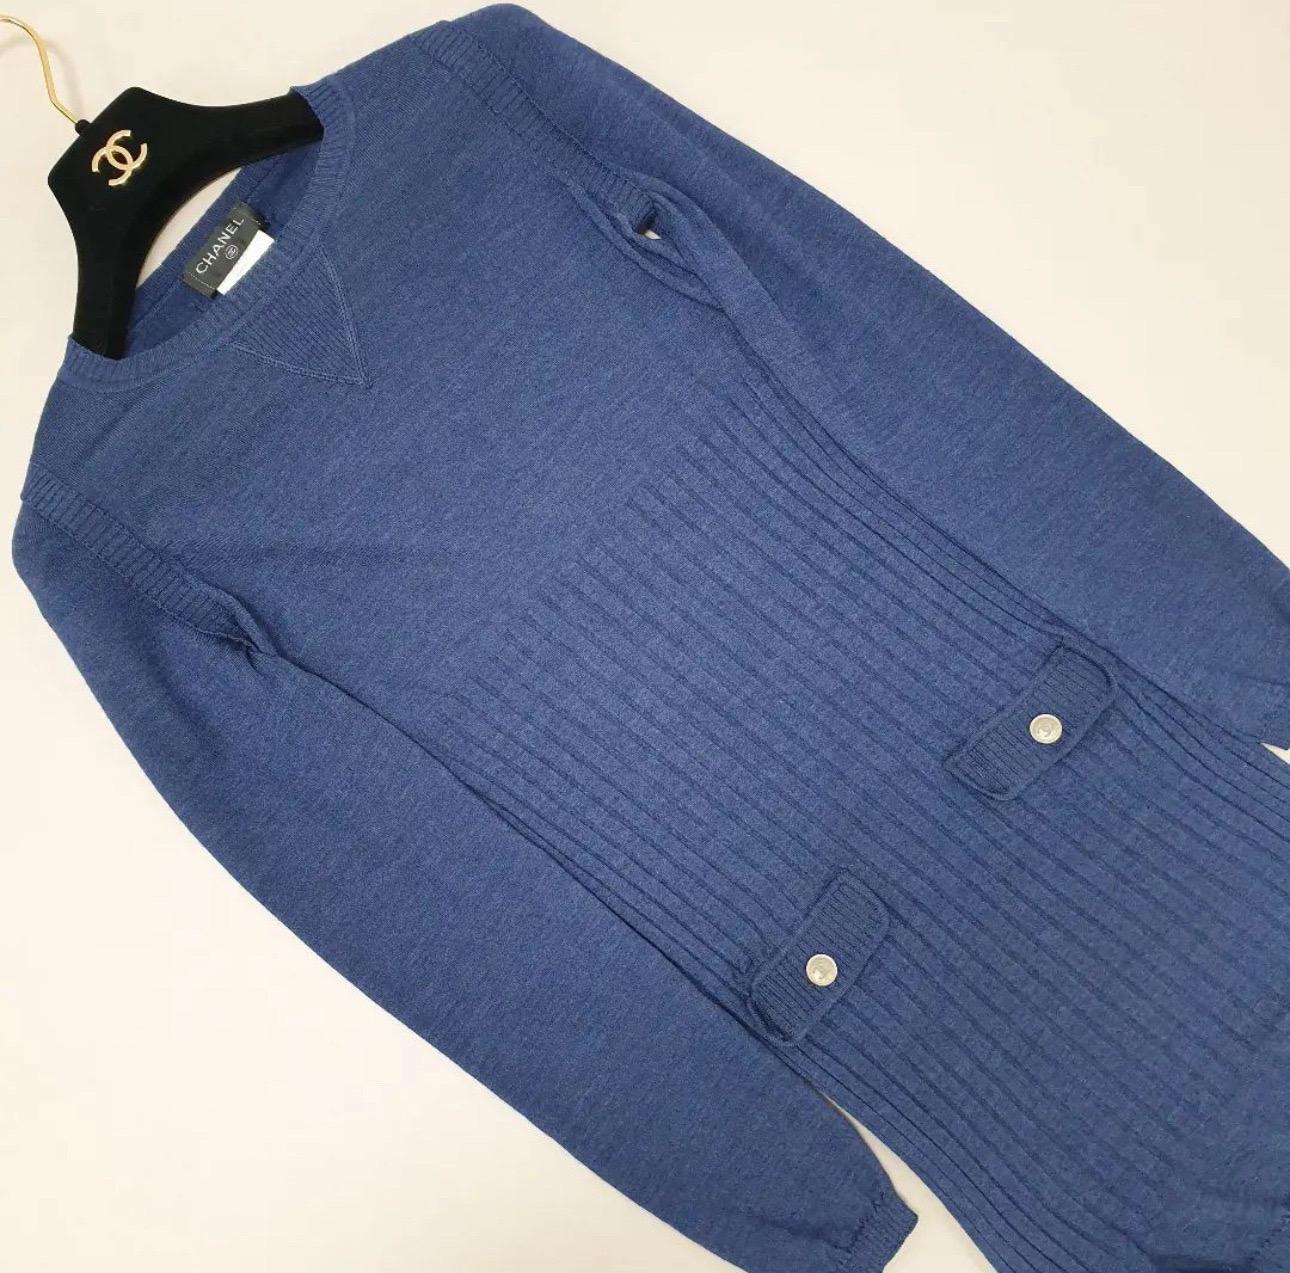 Chanel Navy Long Sleeve Knit Dress In Good Condition For Sale In Krakow, PL